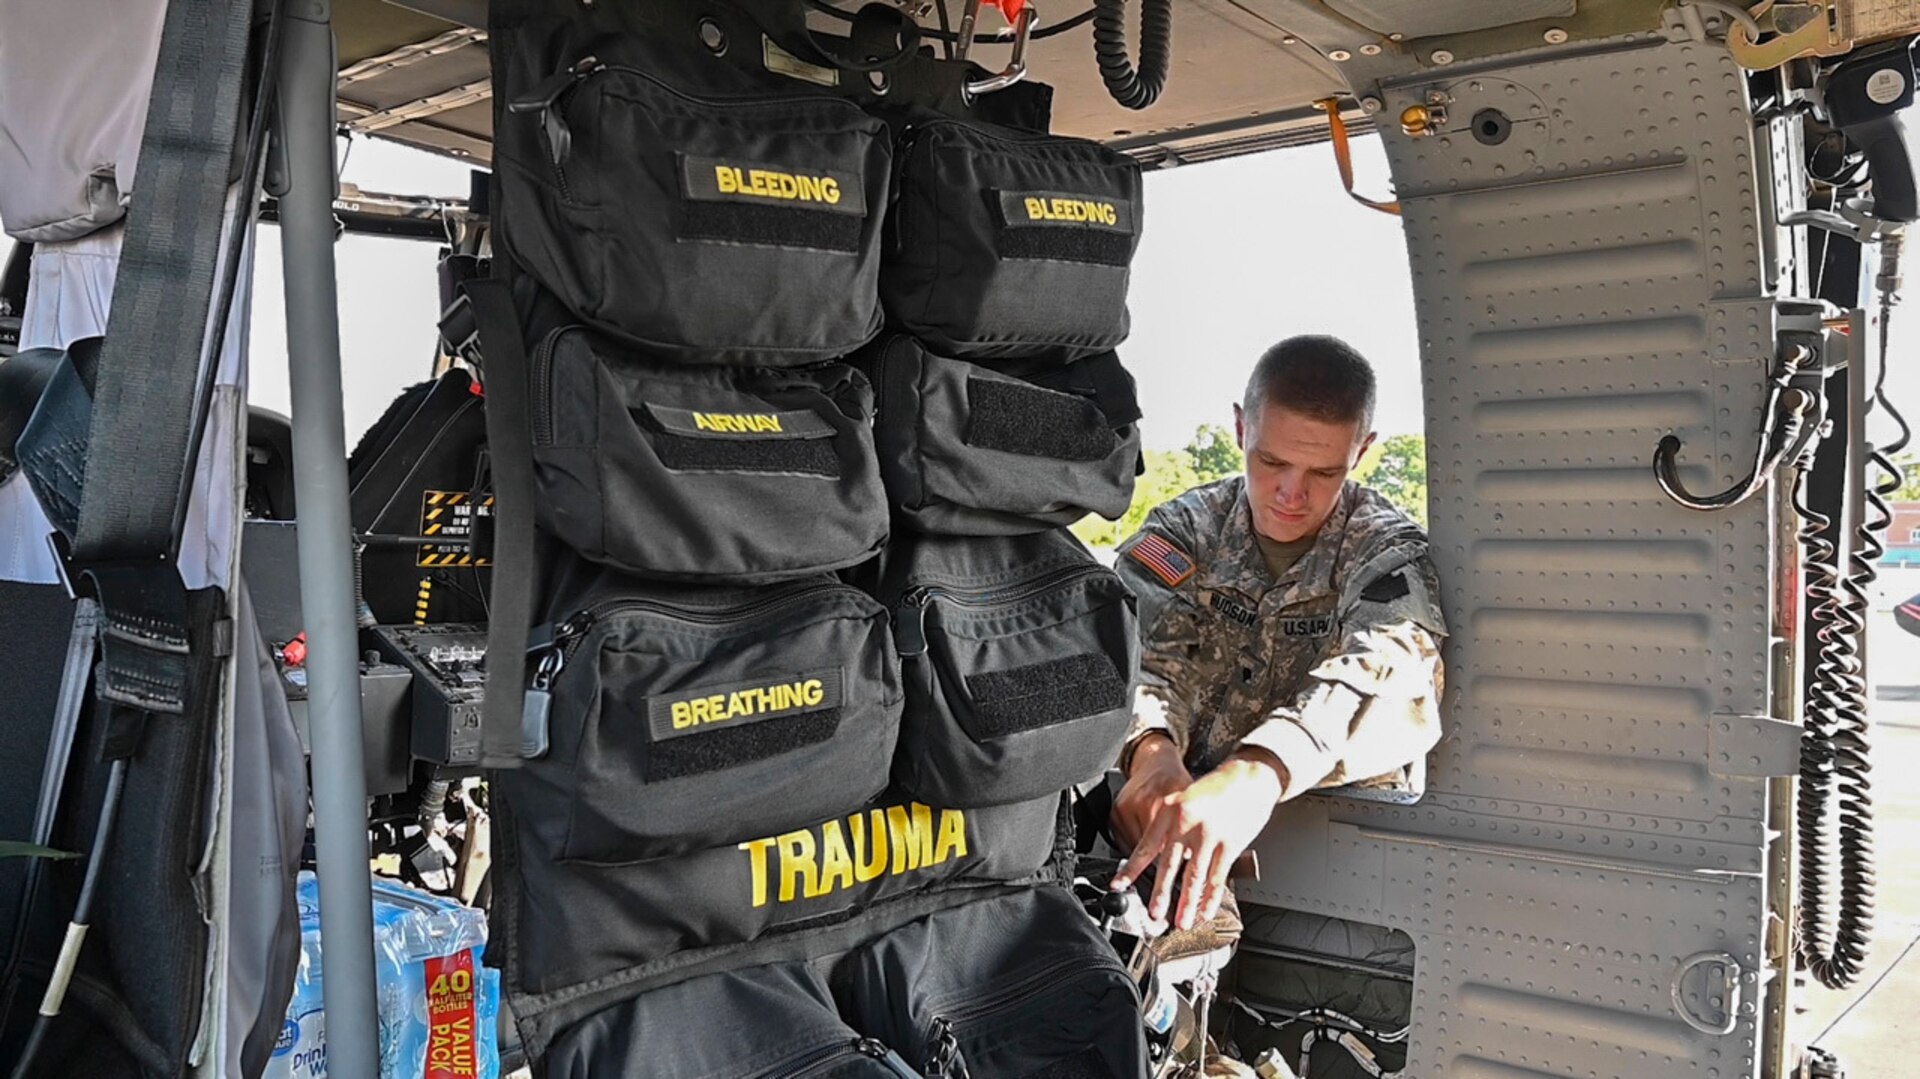 Crew members from the West Virginia National Guard's Company C., 2-104th General Support Aviation Battalion, located in Williamstown, W.Va., prepare to deploy to South Carolina in support of Hurricane Dorian response and recovery operations Sept. 4, 2019. Eight Soldiers from the aeromedical evacuation crew will be on standby for a week to provide assistance as needed. (U.S. Army National Guard photo by Edwin Wriston)